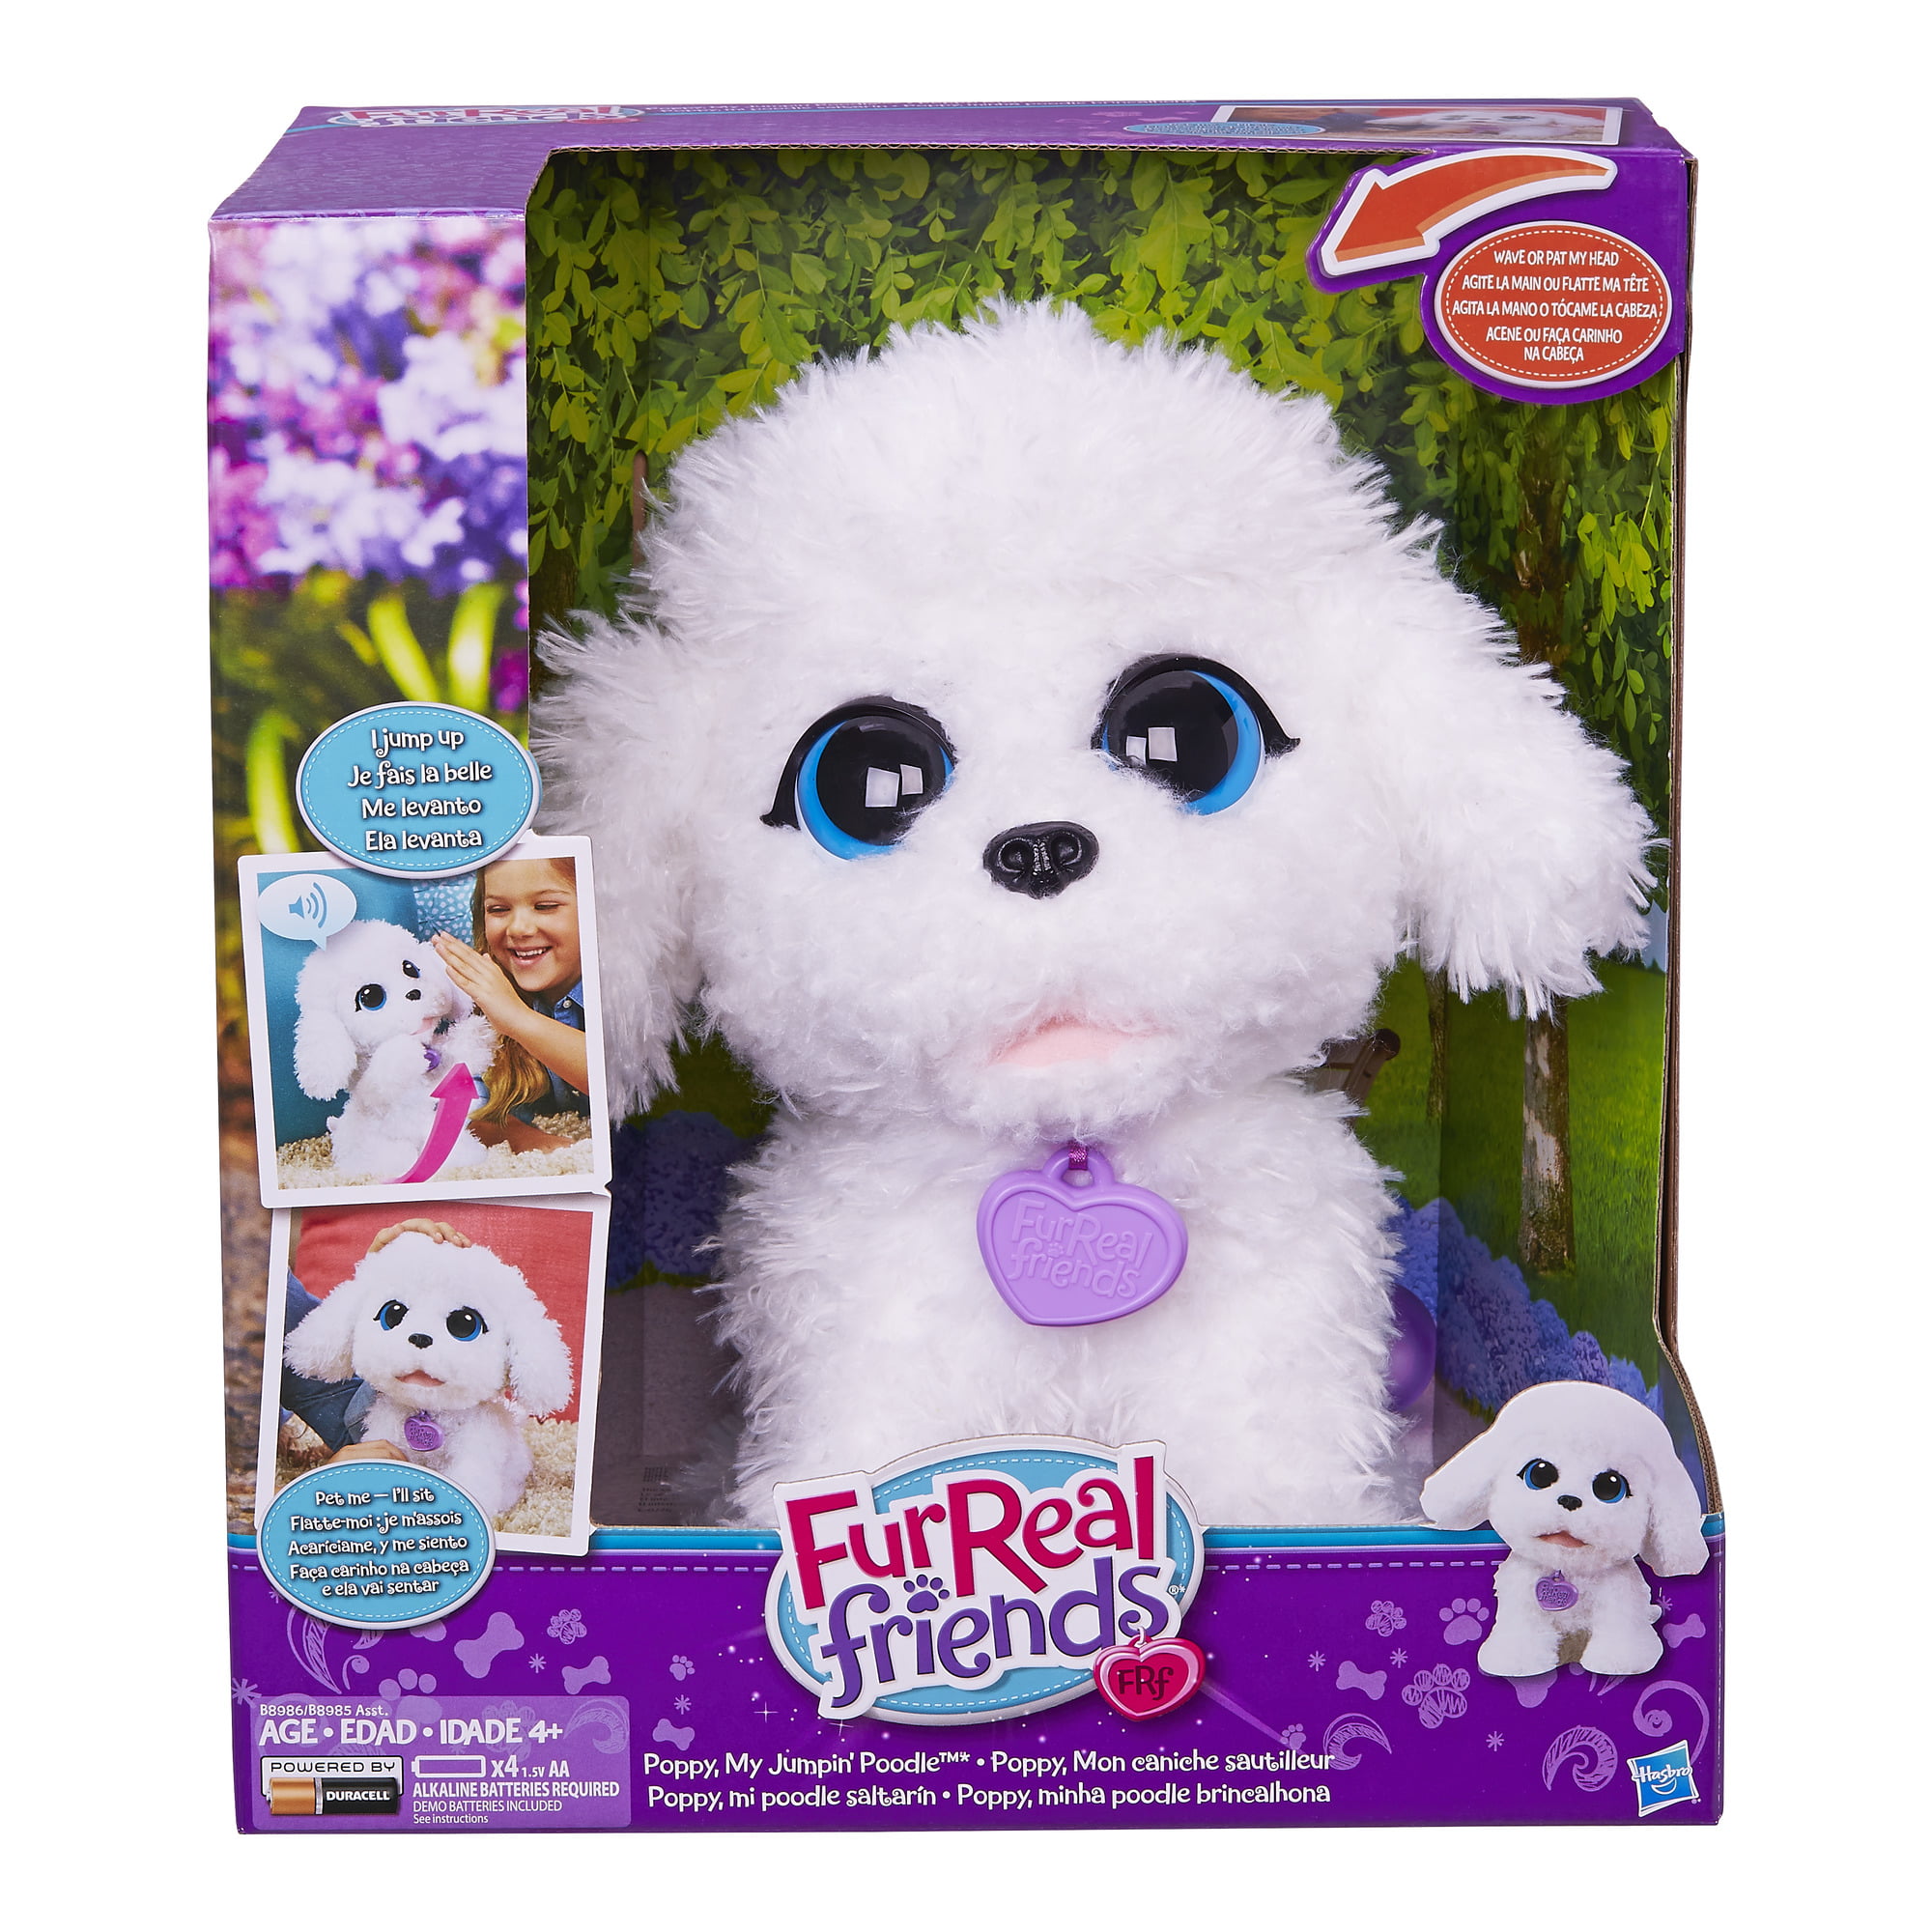 FurReal Friends Playful Pets Poppy My Jumpin Poodle 630509472178 for sale online 